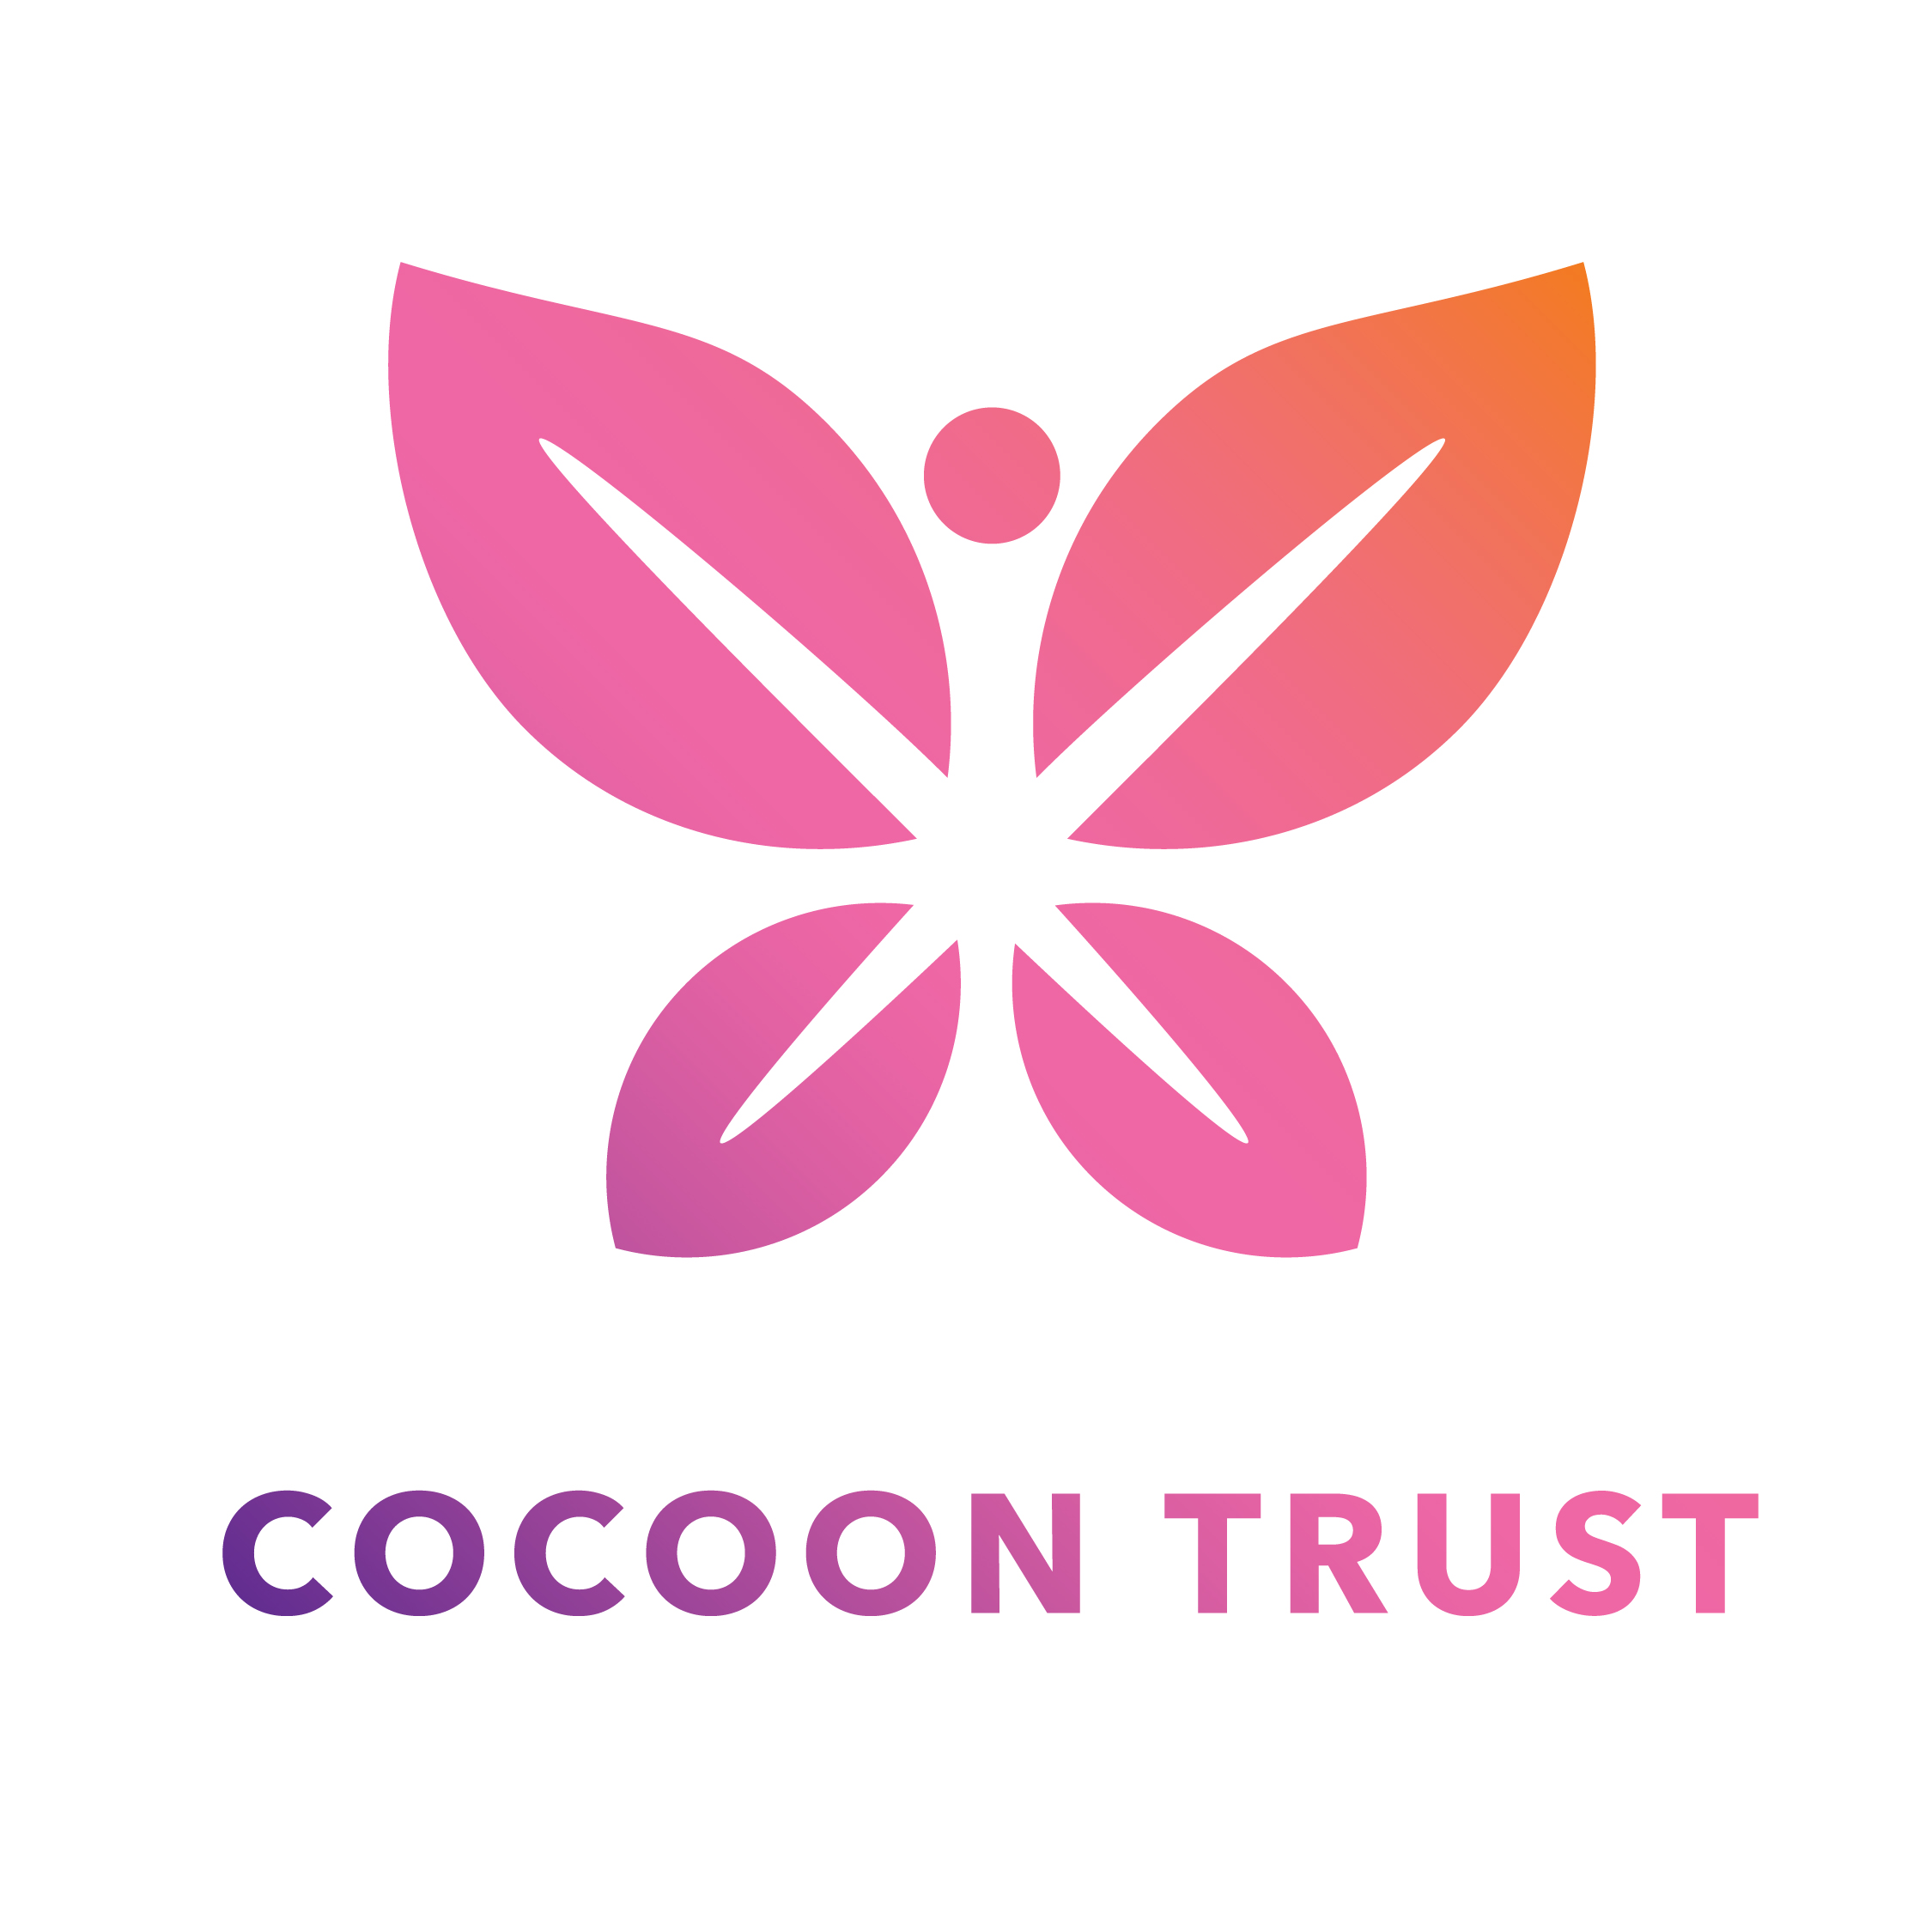 Cocoon Trust logo design by logo designer thoughtfields for your inspiration and for the worlds largest logo competition